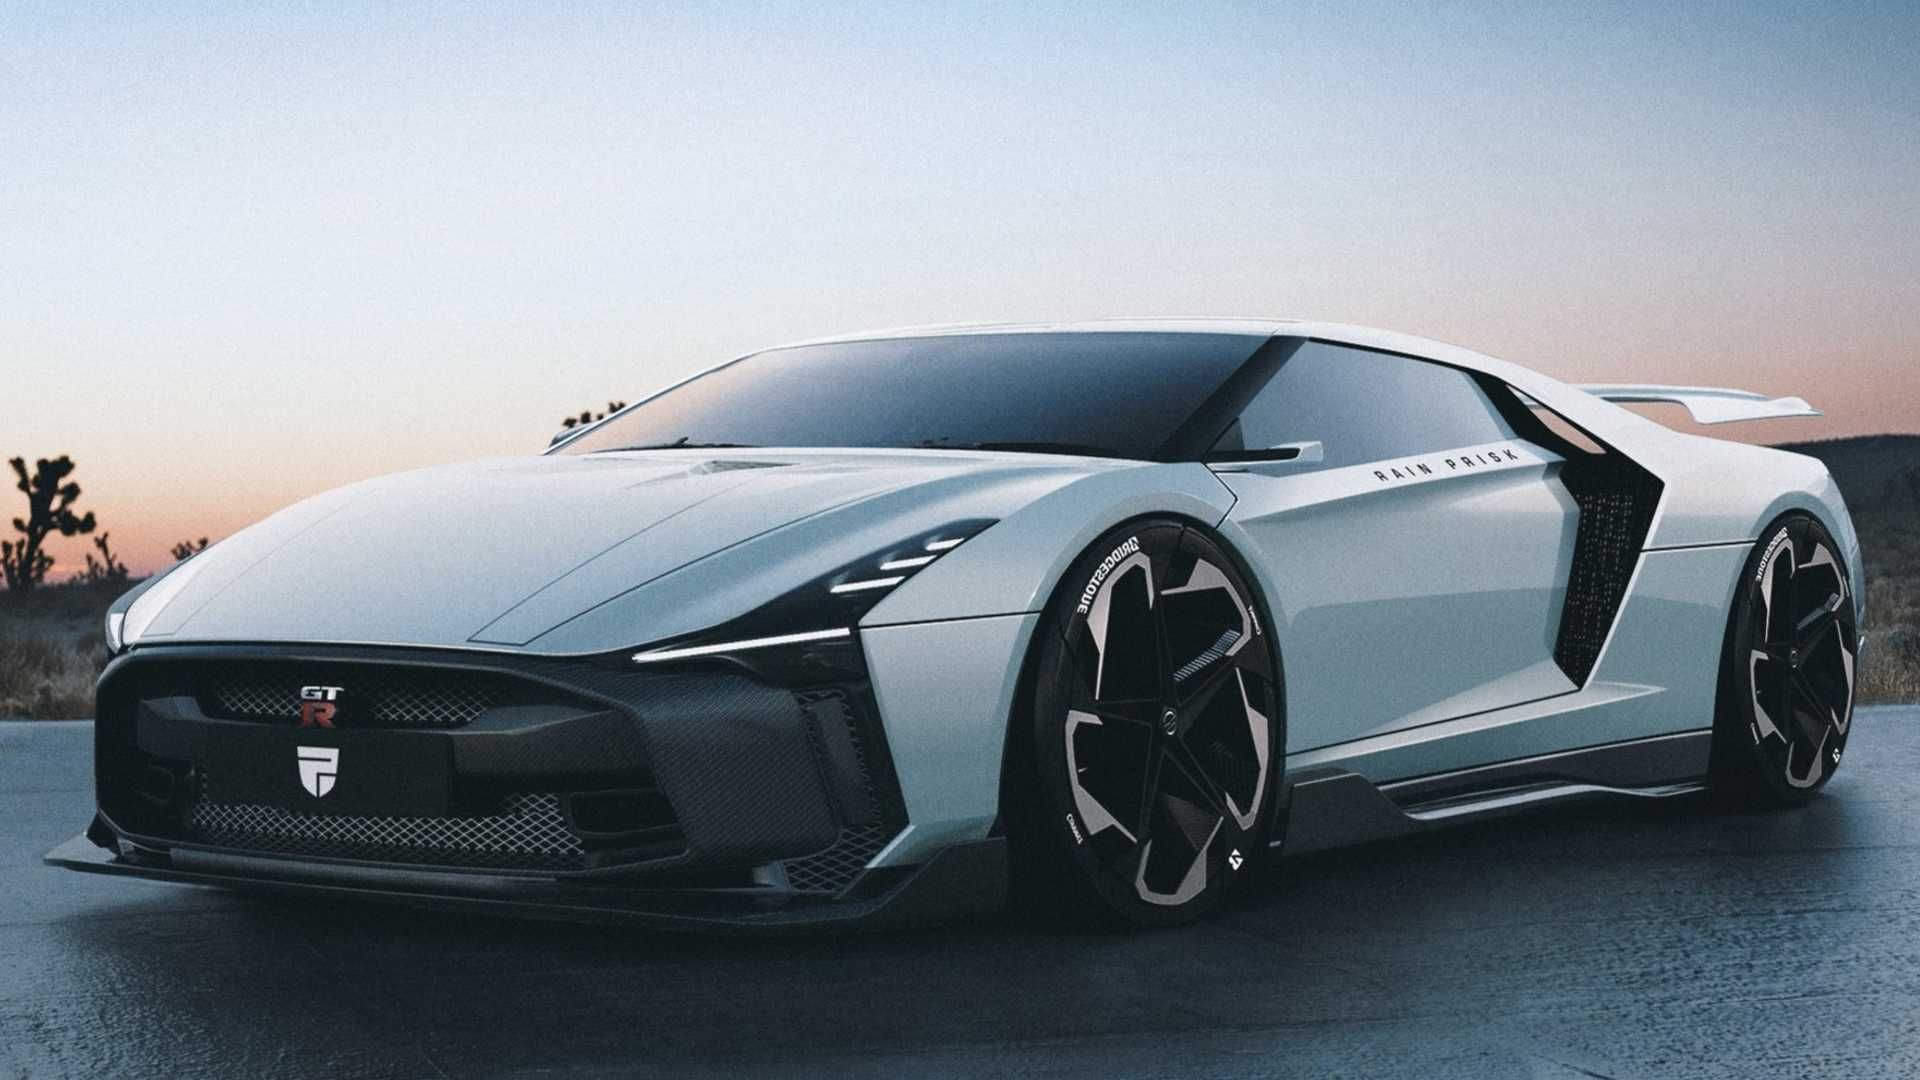 This is one of many GT-R mid engine renderings